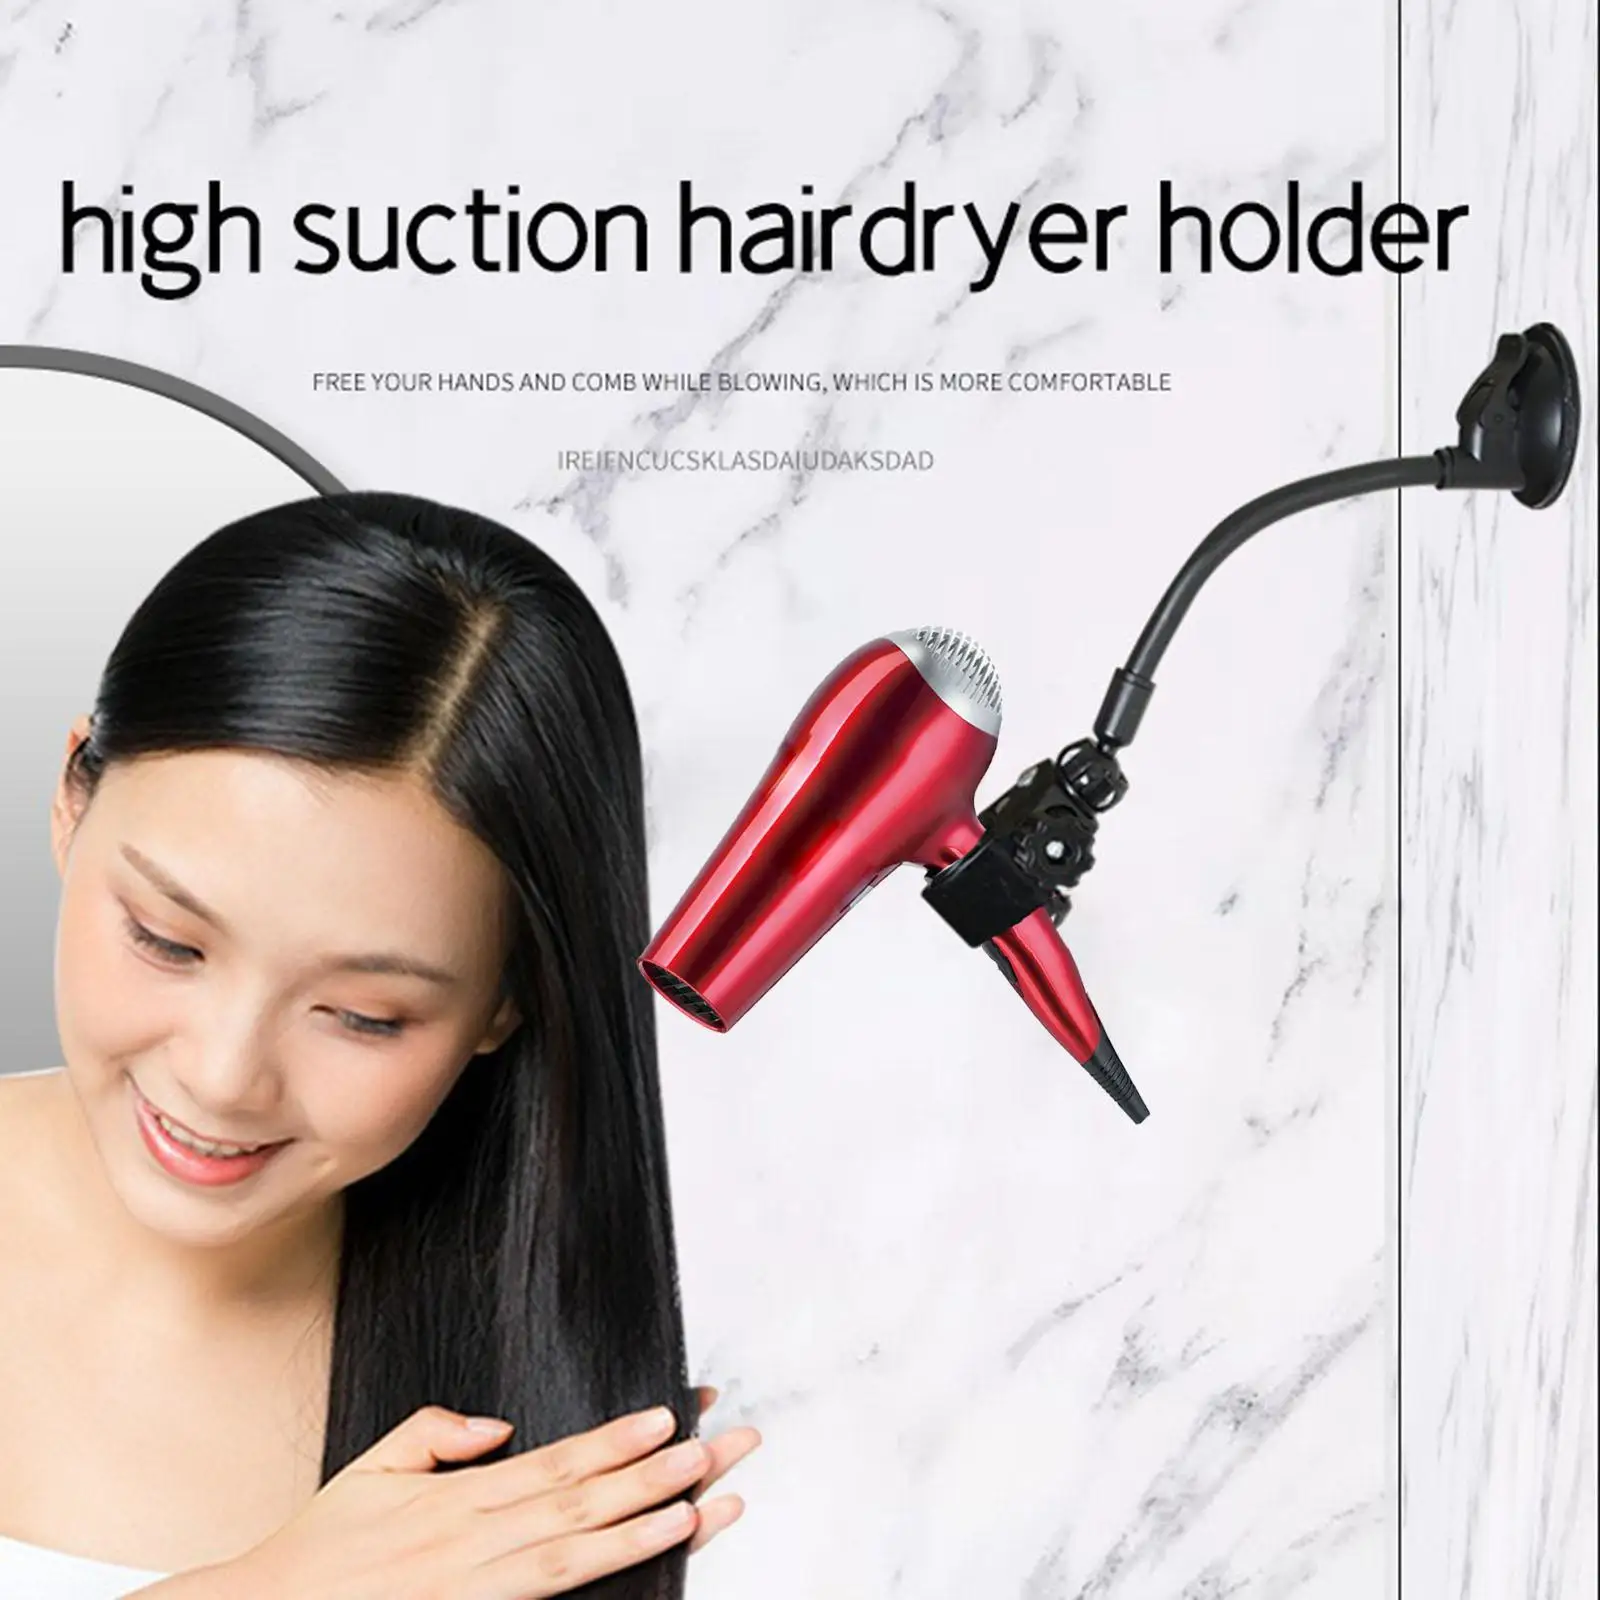 Flexible Blow Dryer Stand Suction Cup Rack Adjustable Hands Free Bracket Hair Dryer Holder for Drying Hair Salon Household